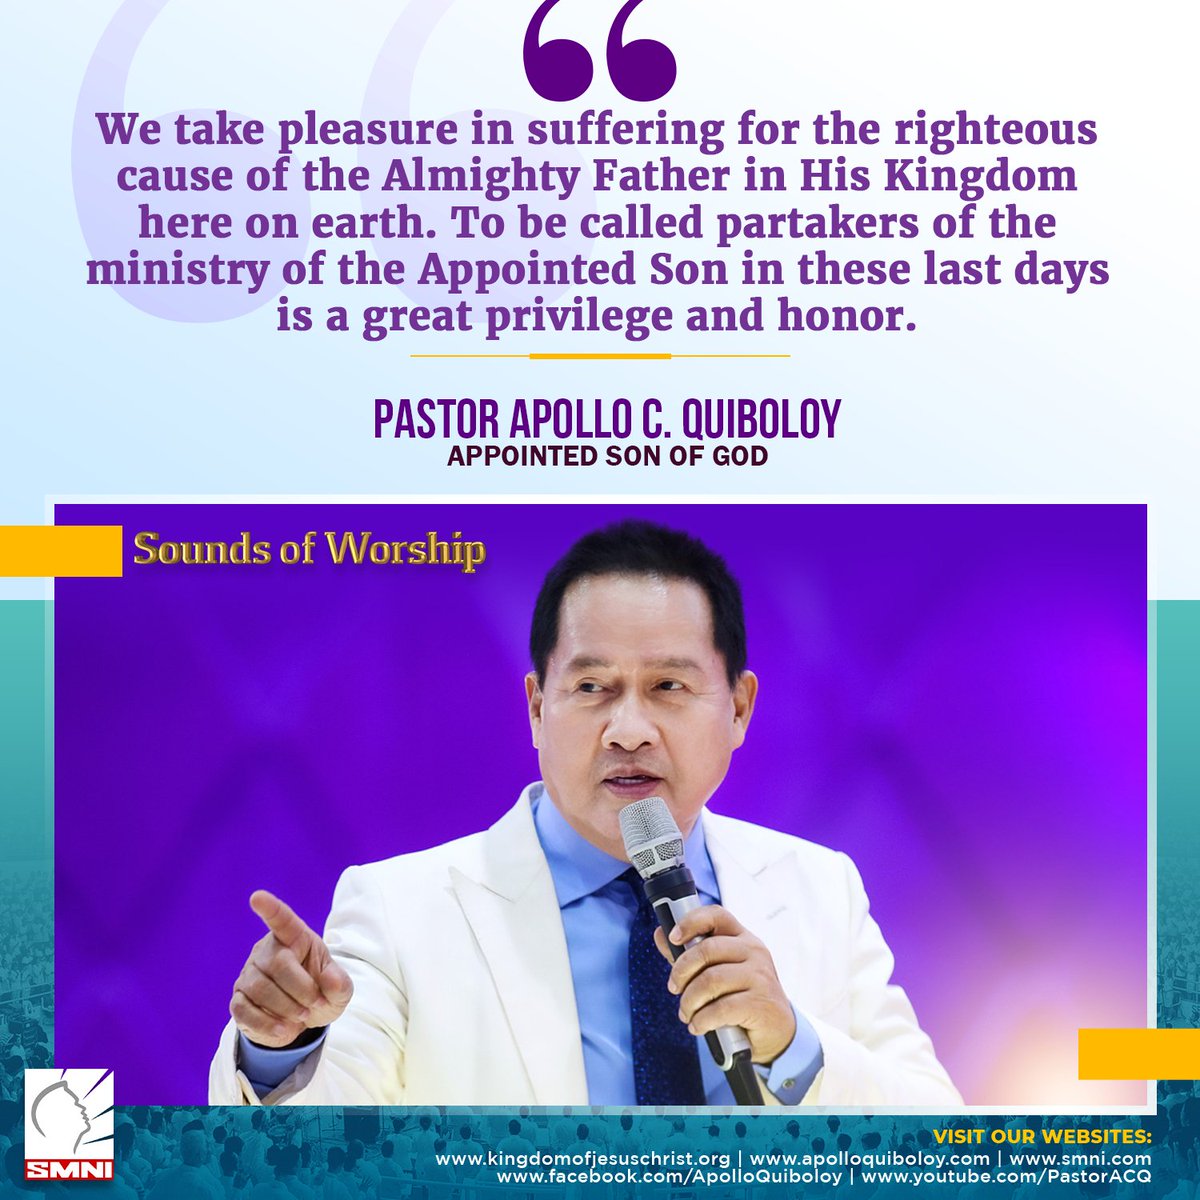 We take pleasure in suffering for the righteous cause of the Almighty Father in His Kingdom of God on earth. To be called partakers of the ministry of the Appointed Son in these last days is a great privilege and honor. #ApolloQuiboloy #KingdomofJesusChrist #WordsoftheSon